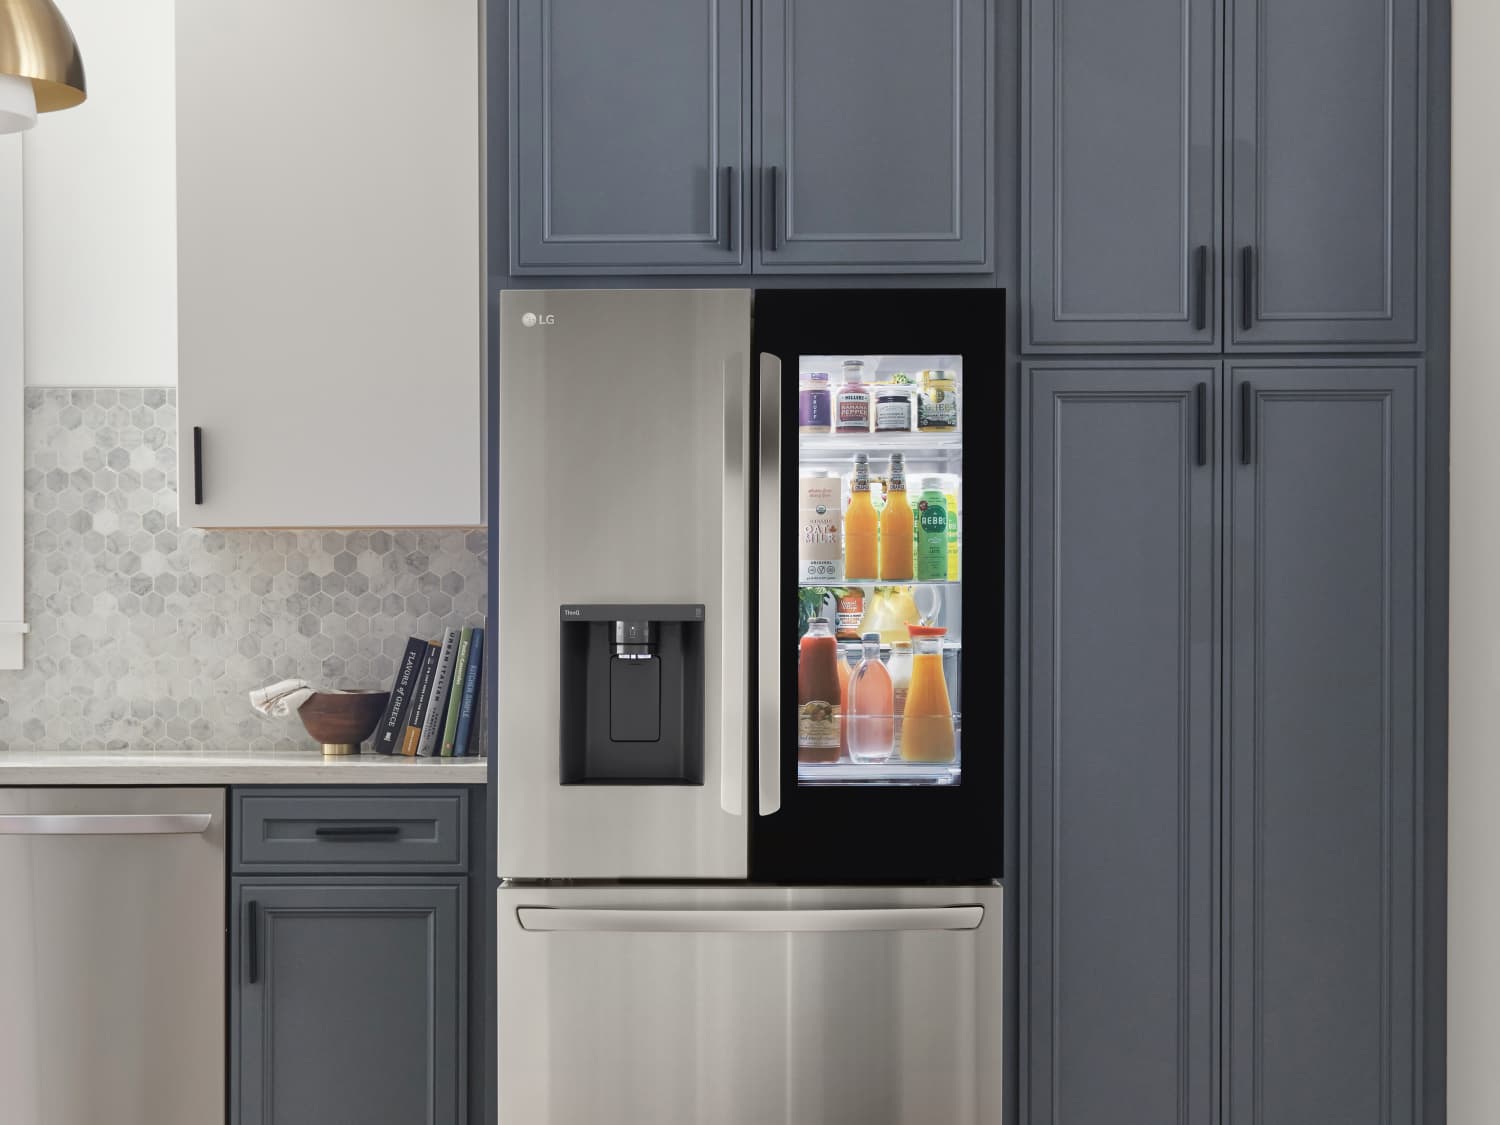 Blending in – 8 examples of kitchens with fridges you won't even notice